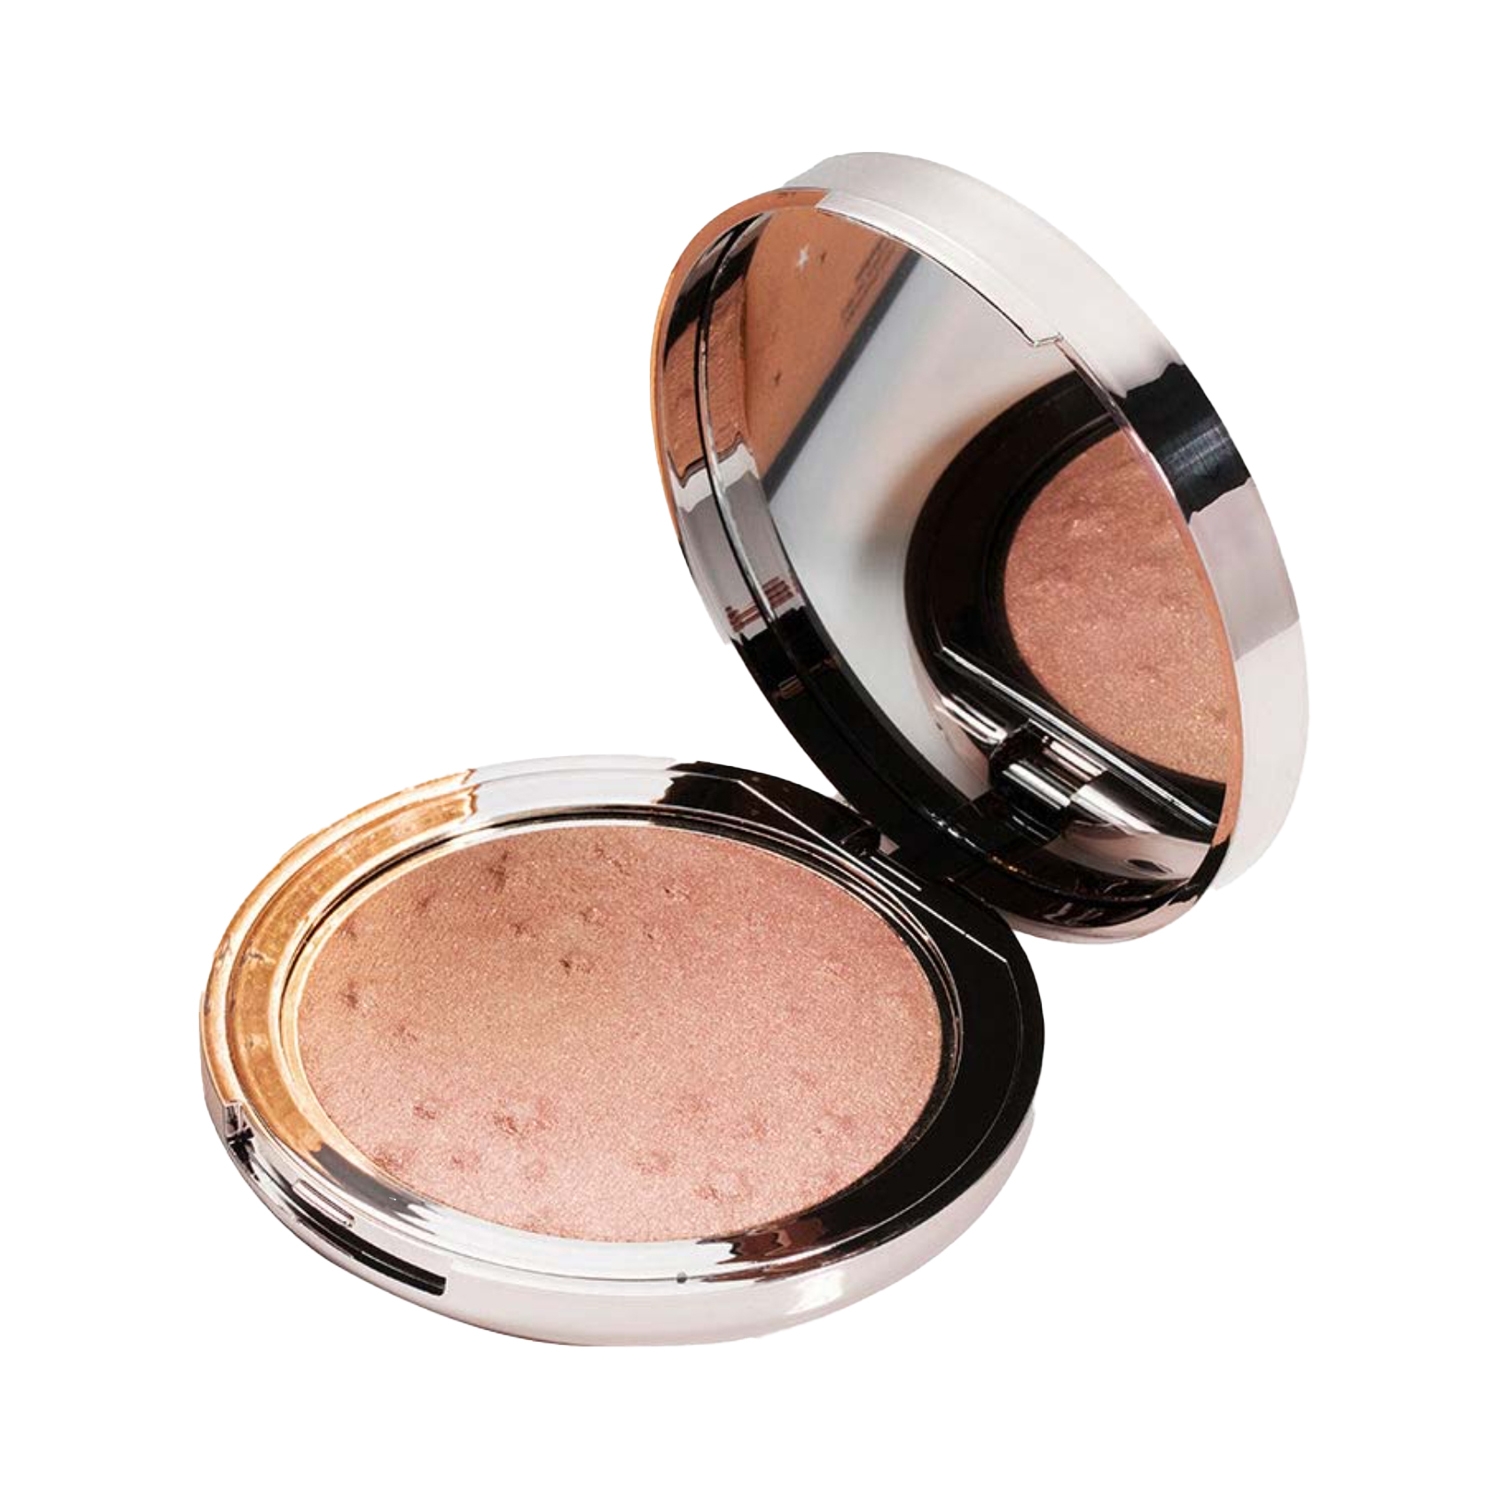 Ciate London | Ciate London Glow To Highlighter - Celestial (5g)